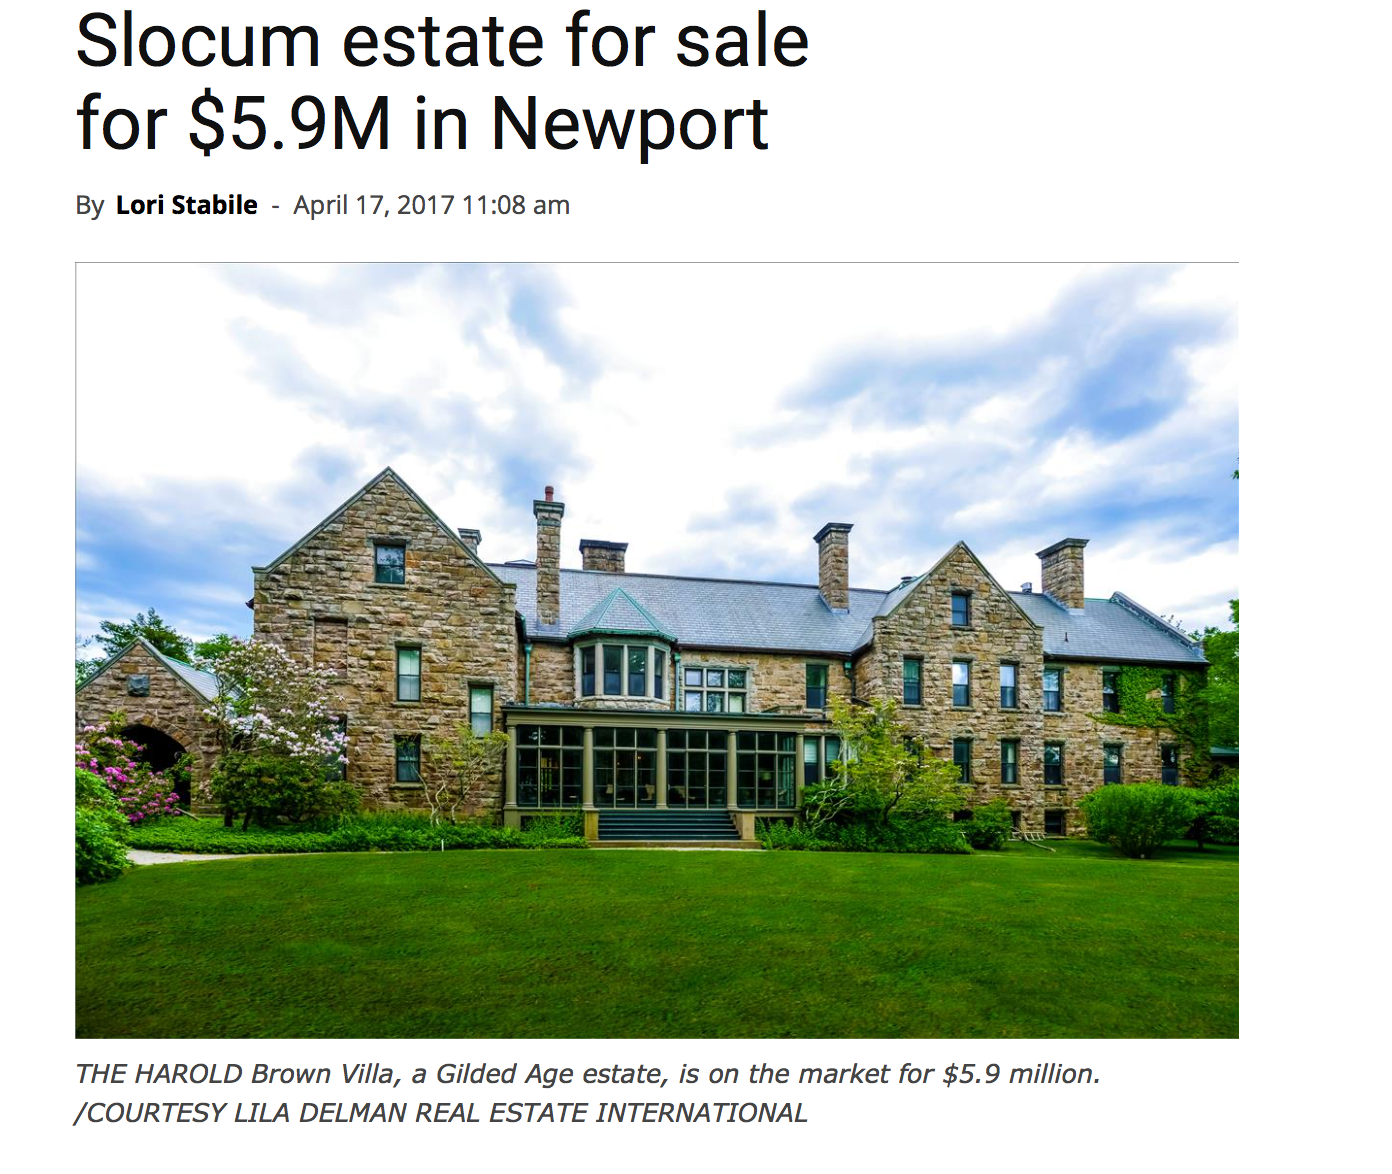 Slocum Estate Featured in Providence Business News